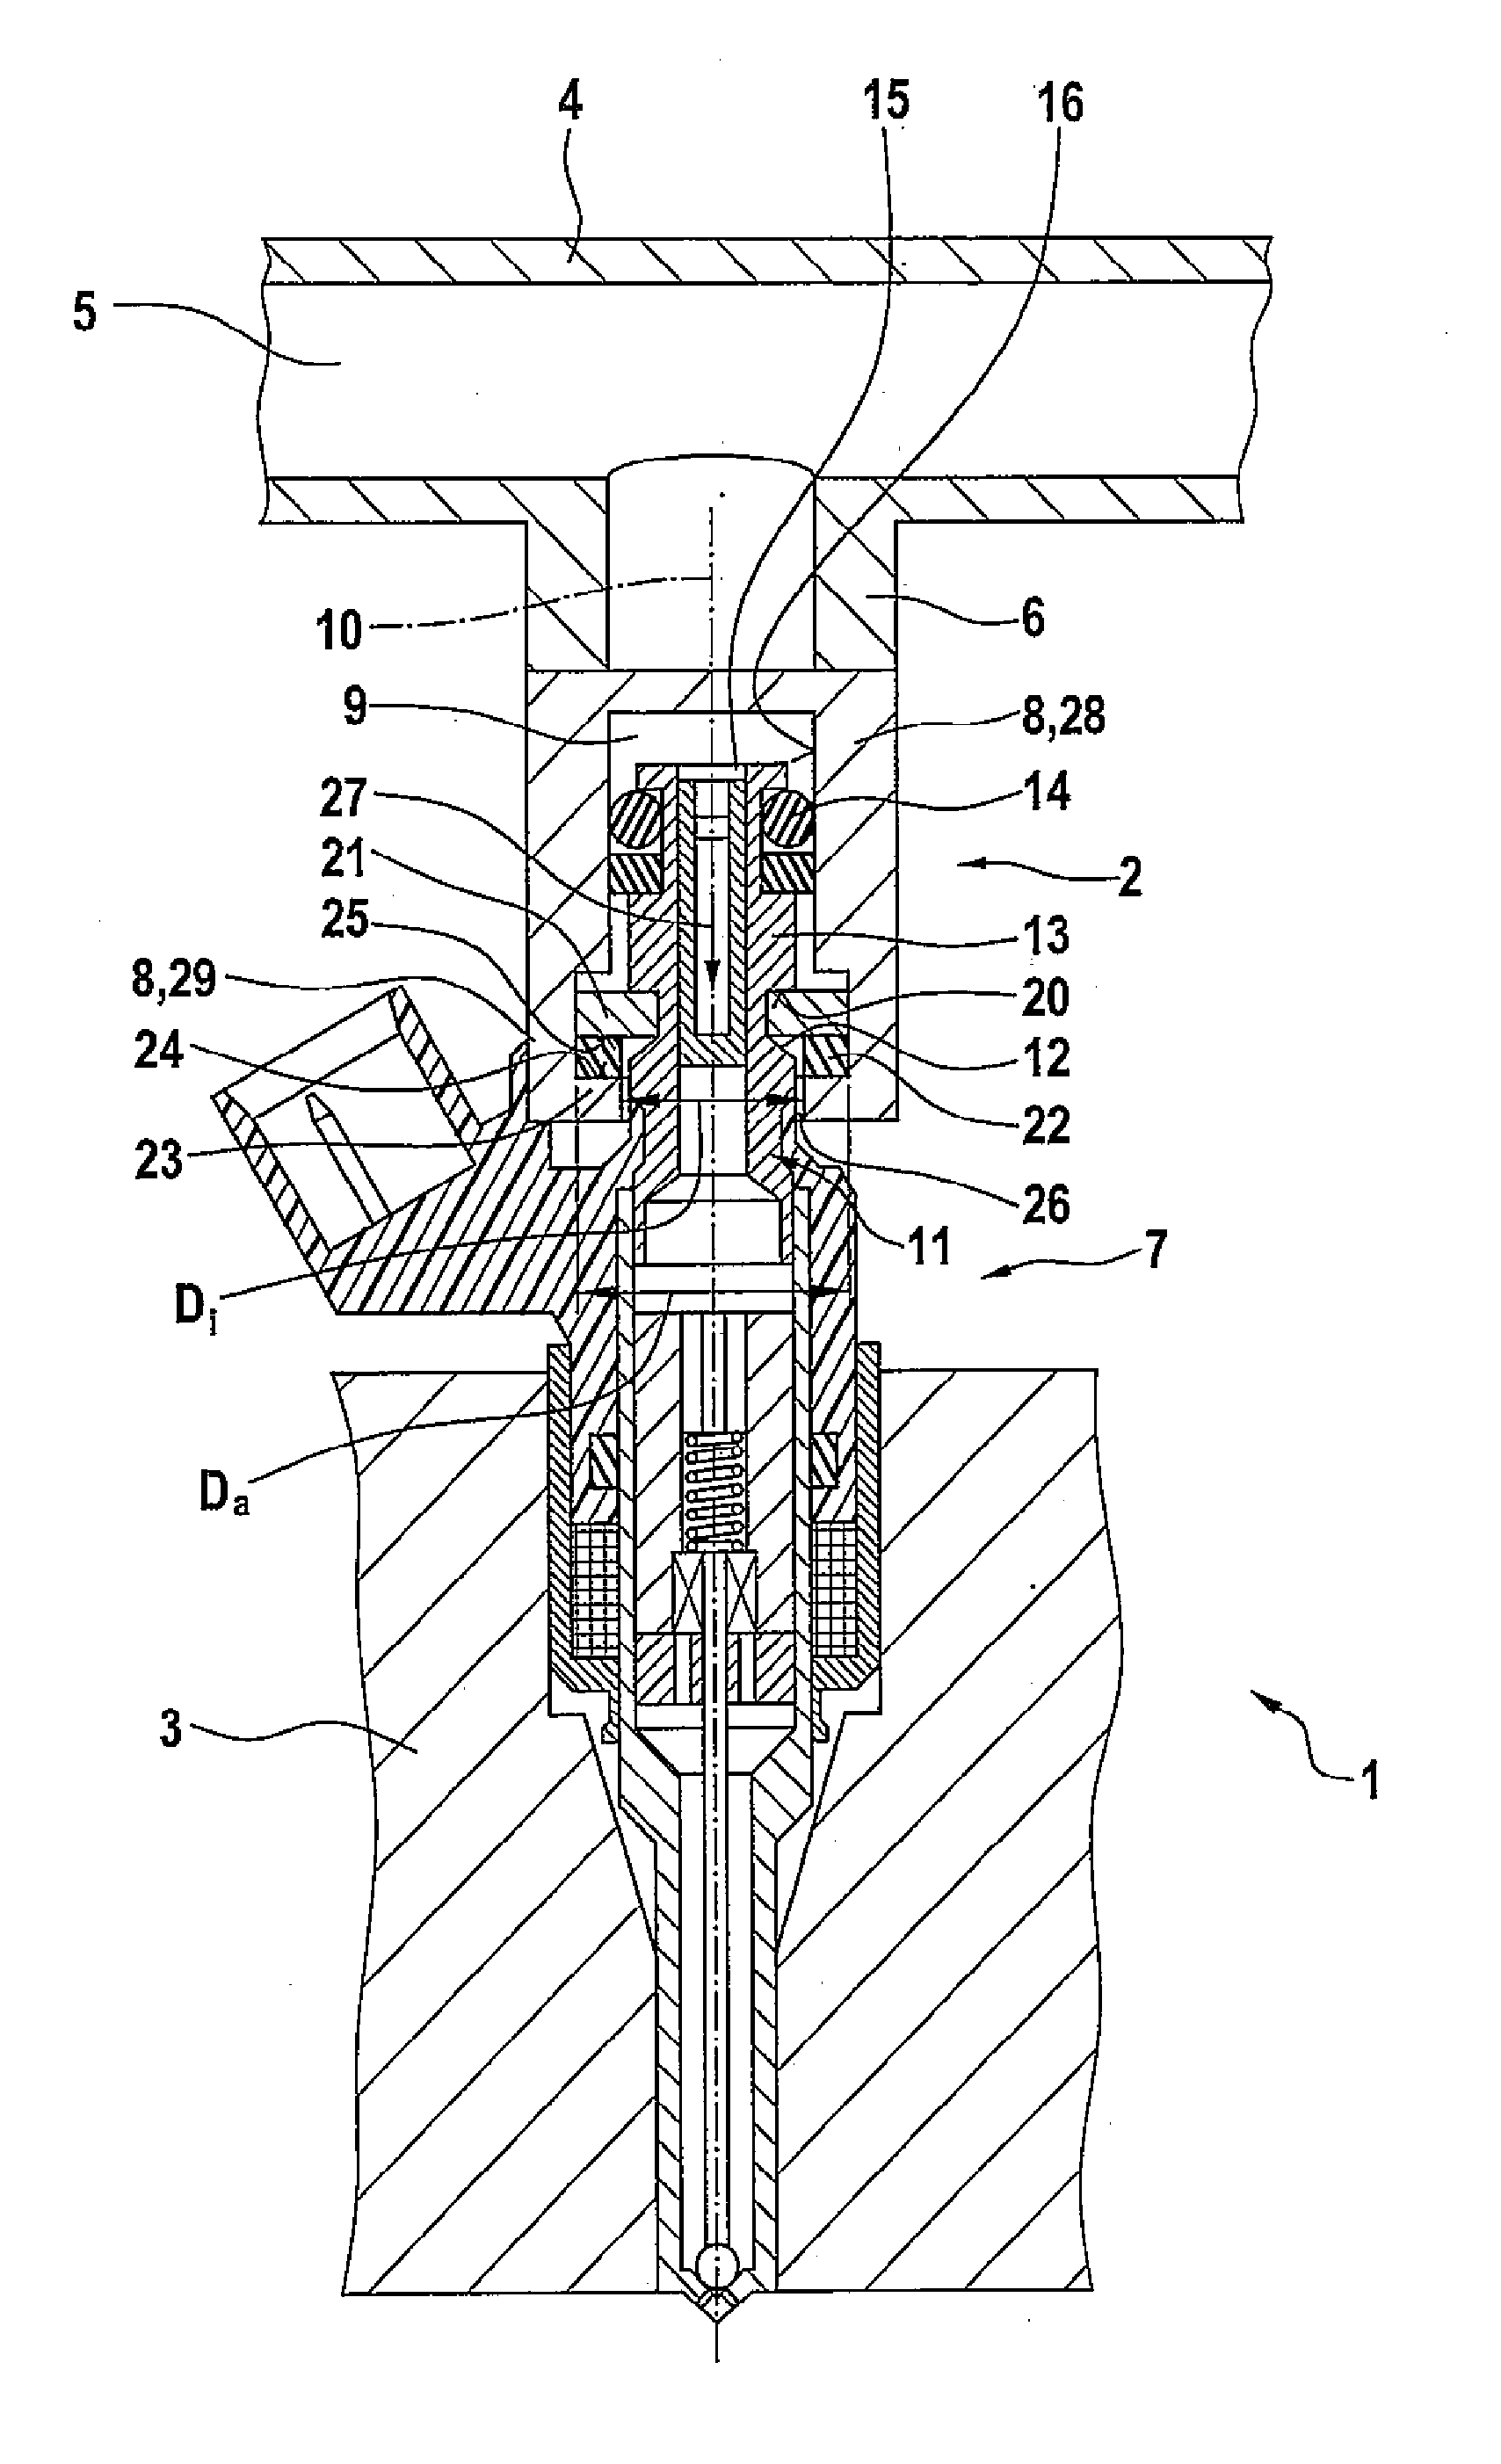 Fuel injection system having a fuel-carrying component, a fuel injector and a suspension